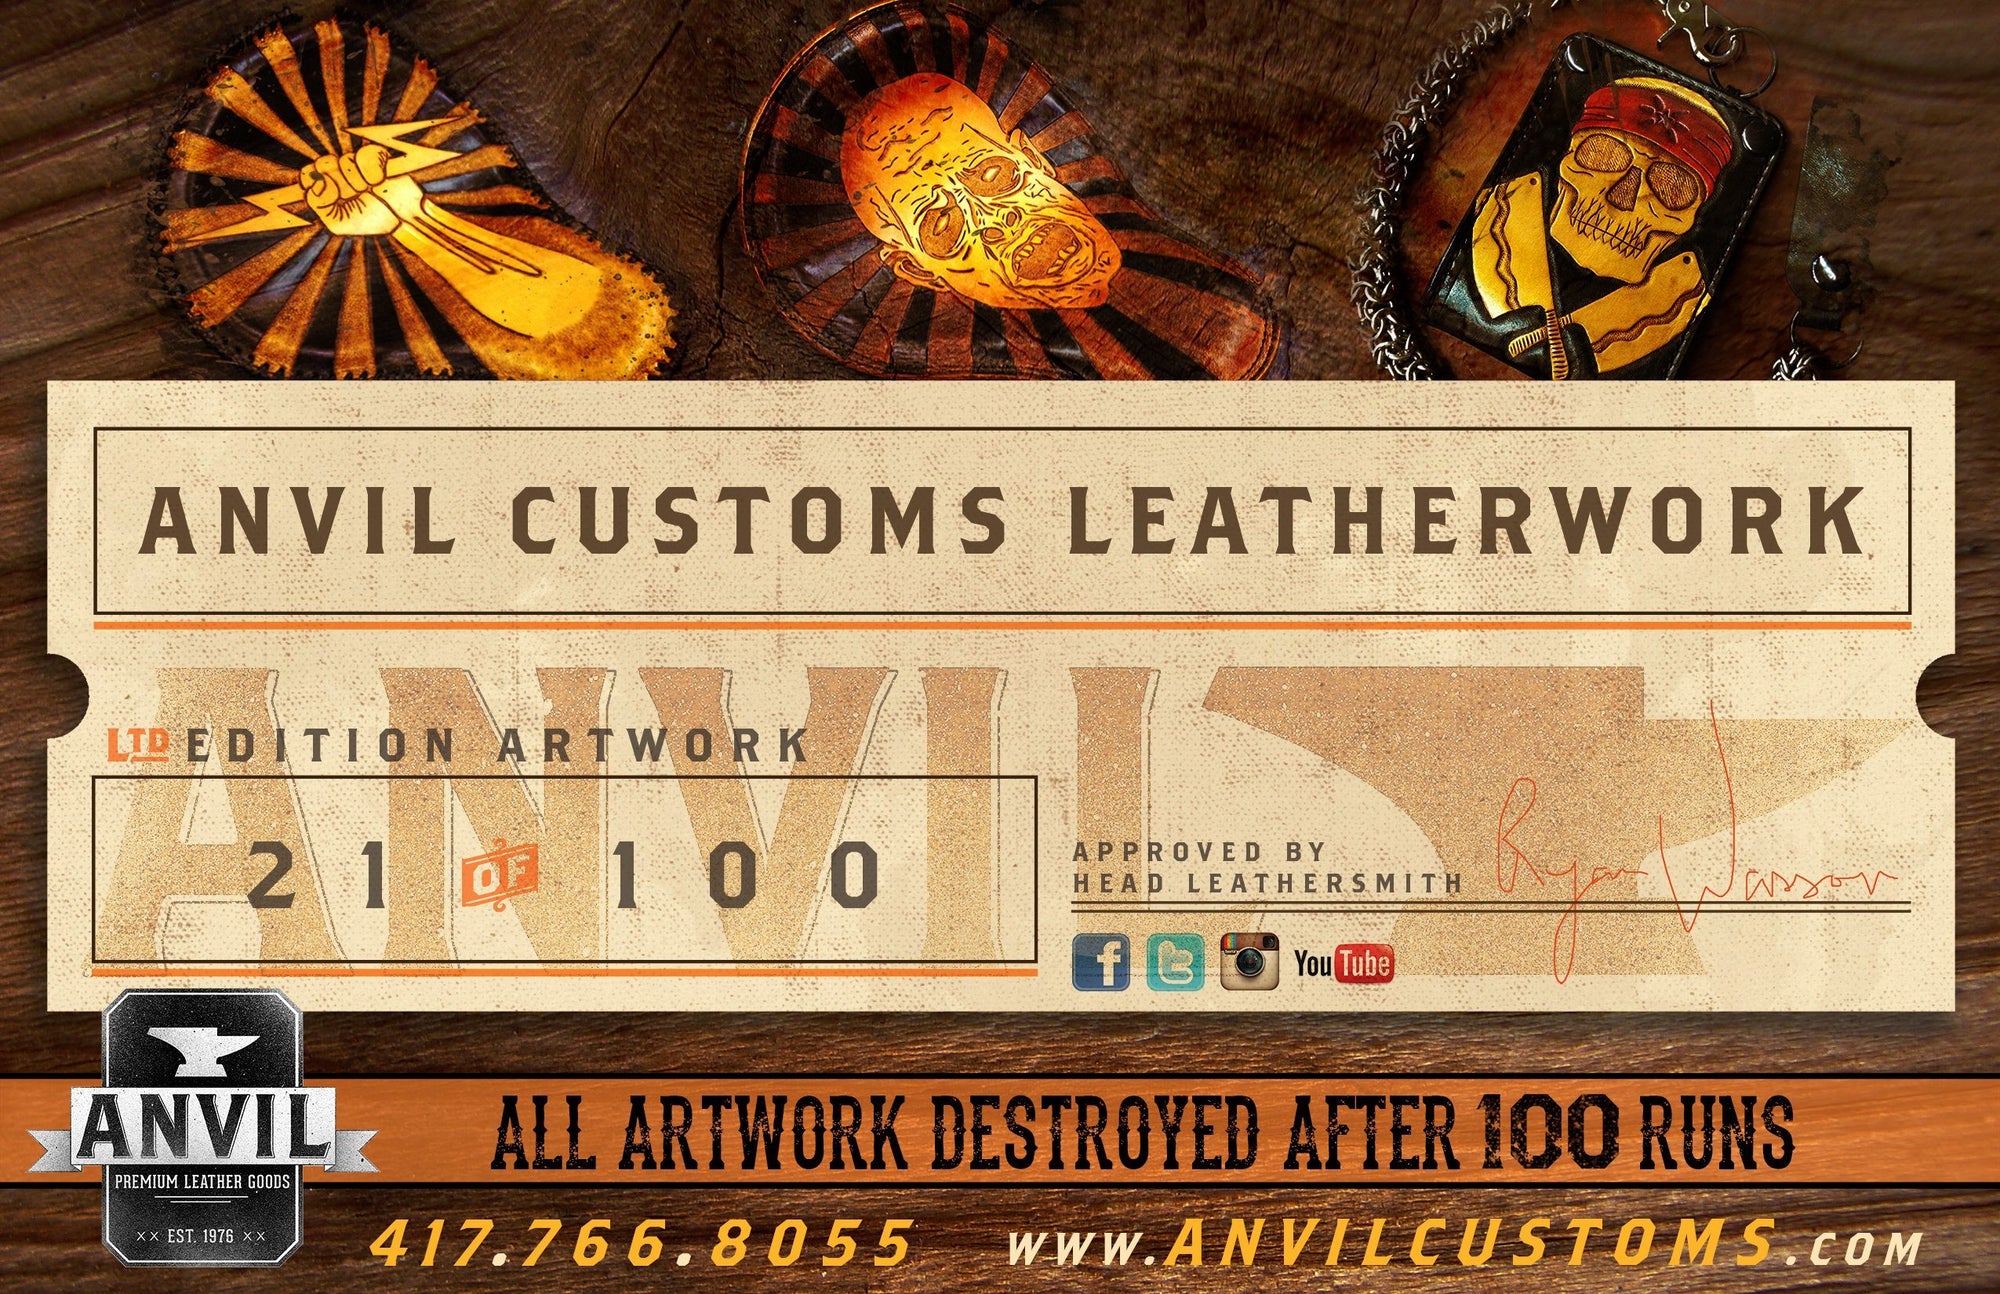 Anvil Customs NEW Website has launched today!  New Leather products & Prices!